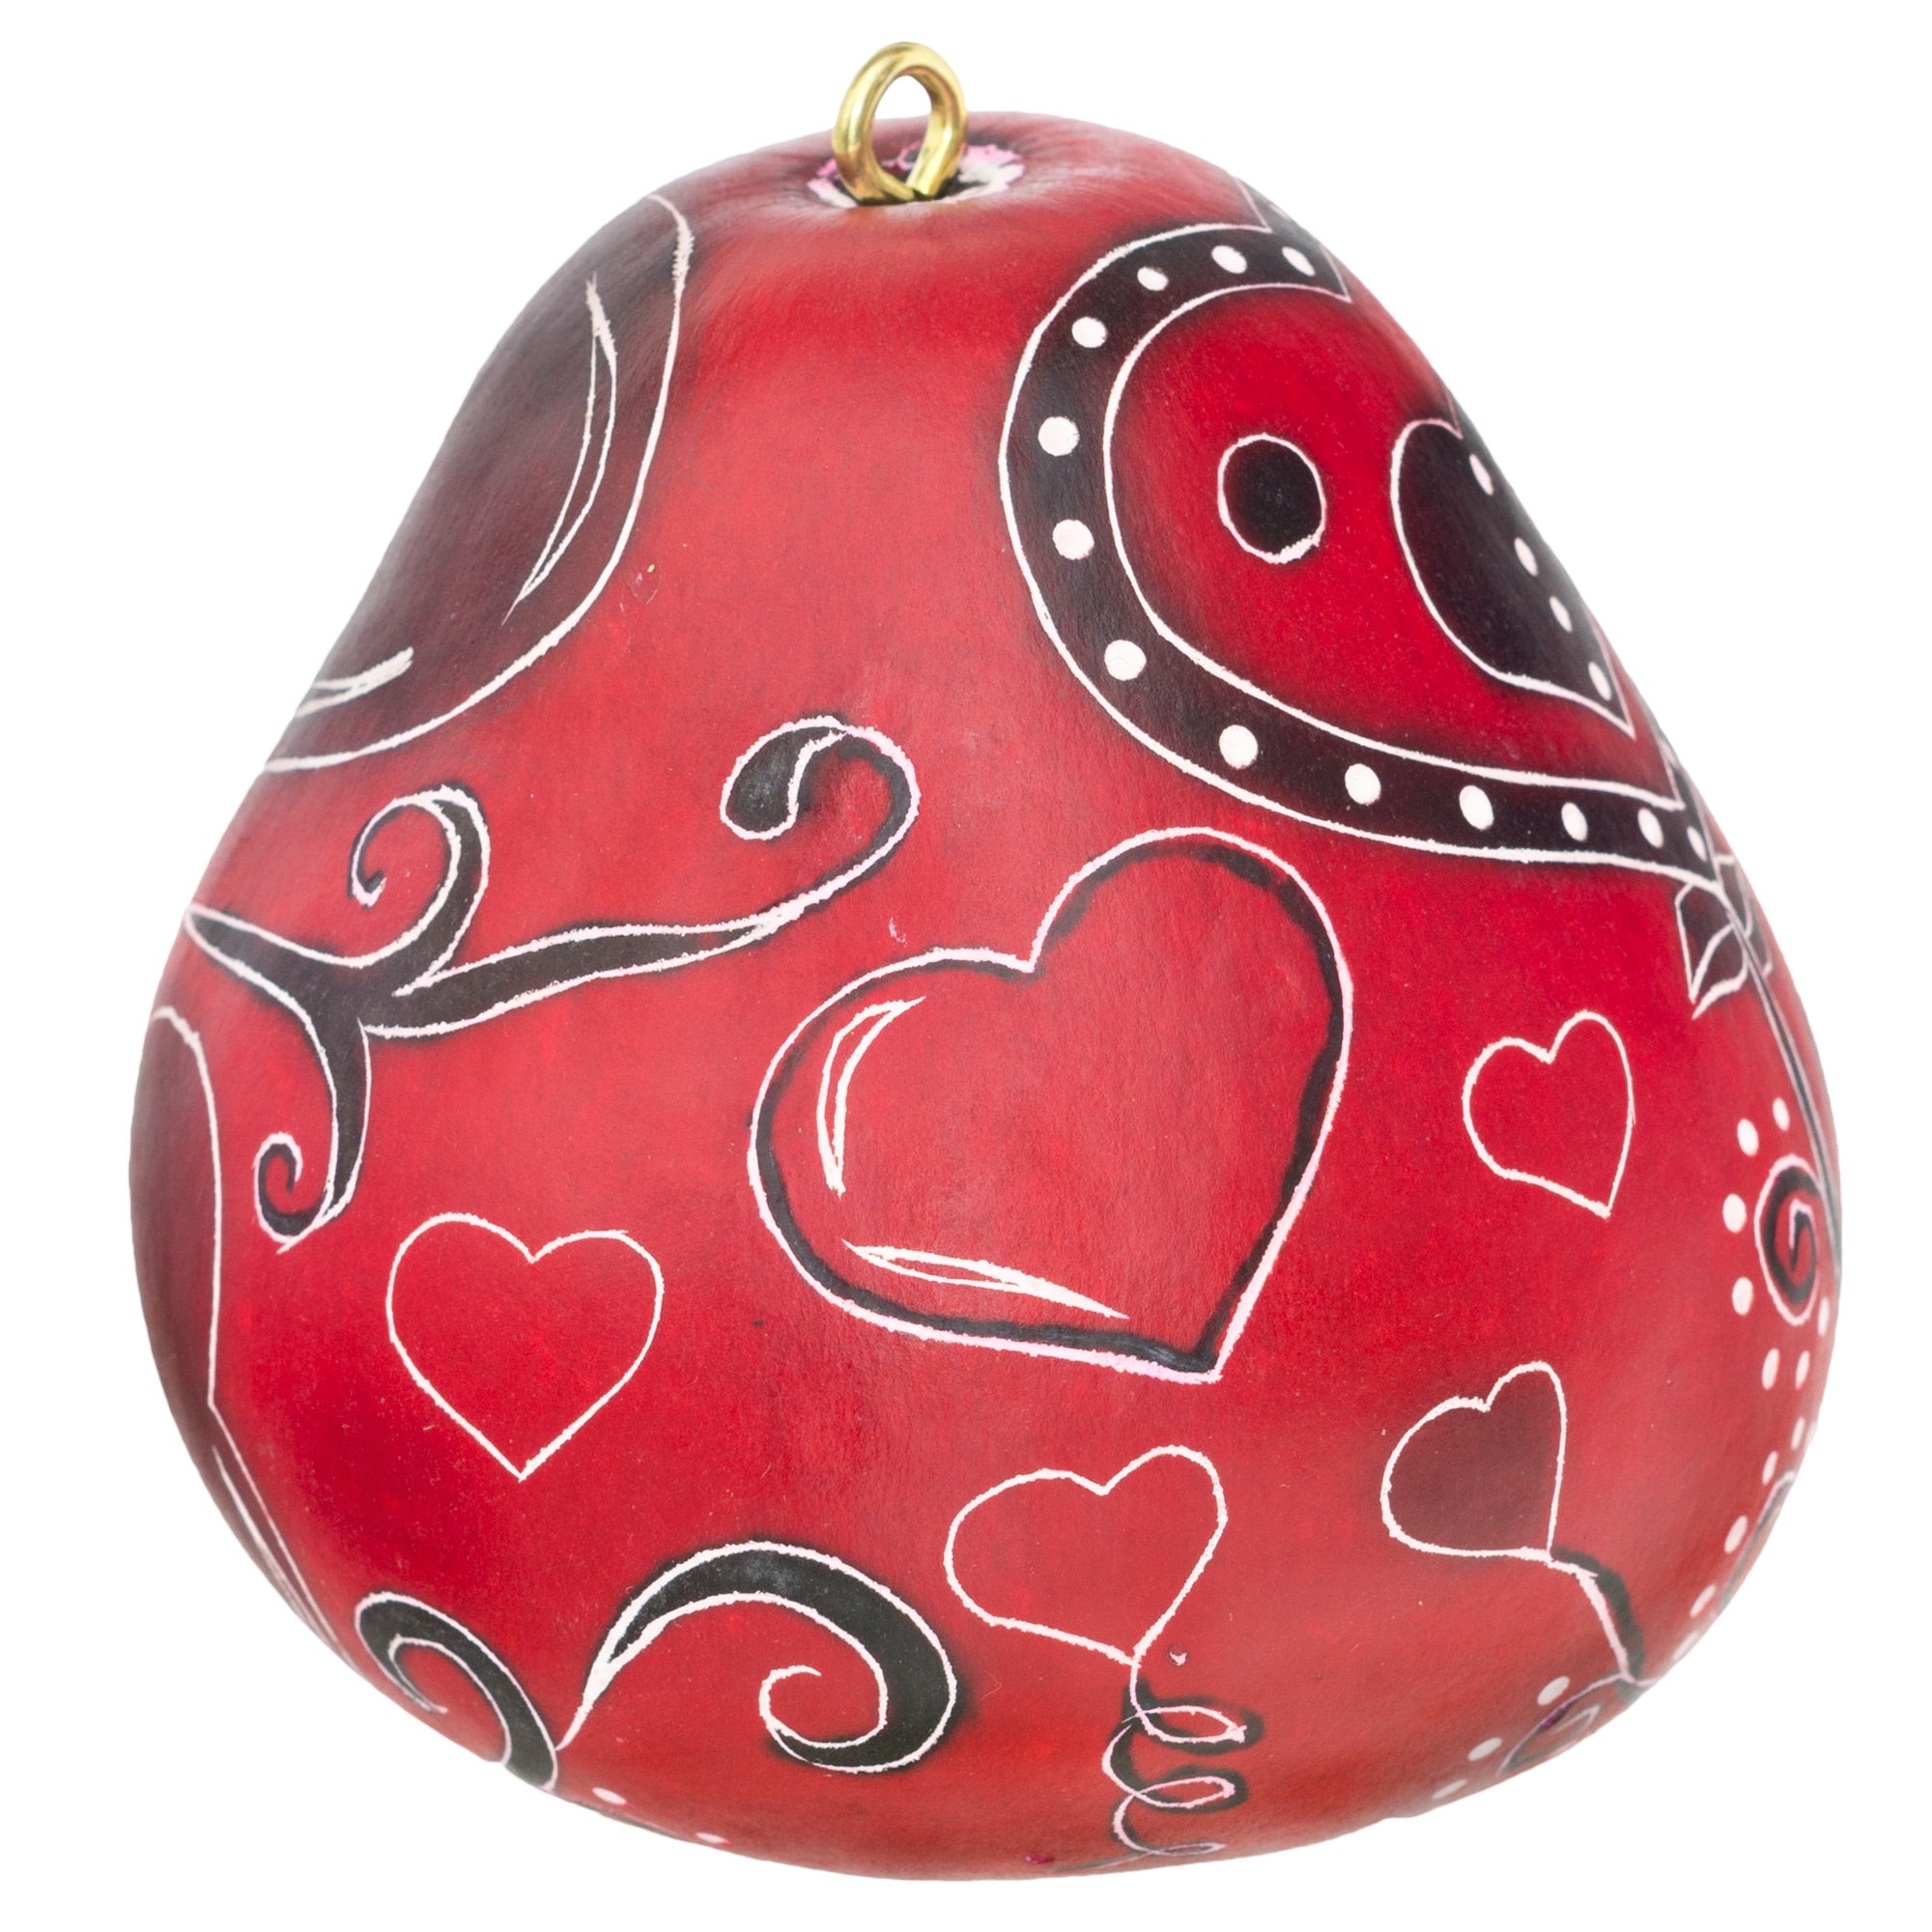 Hearts in Natural and Red - Gourd Ornament